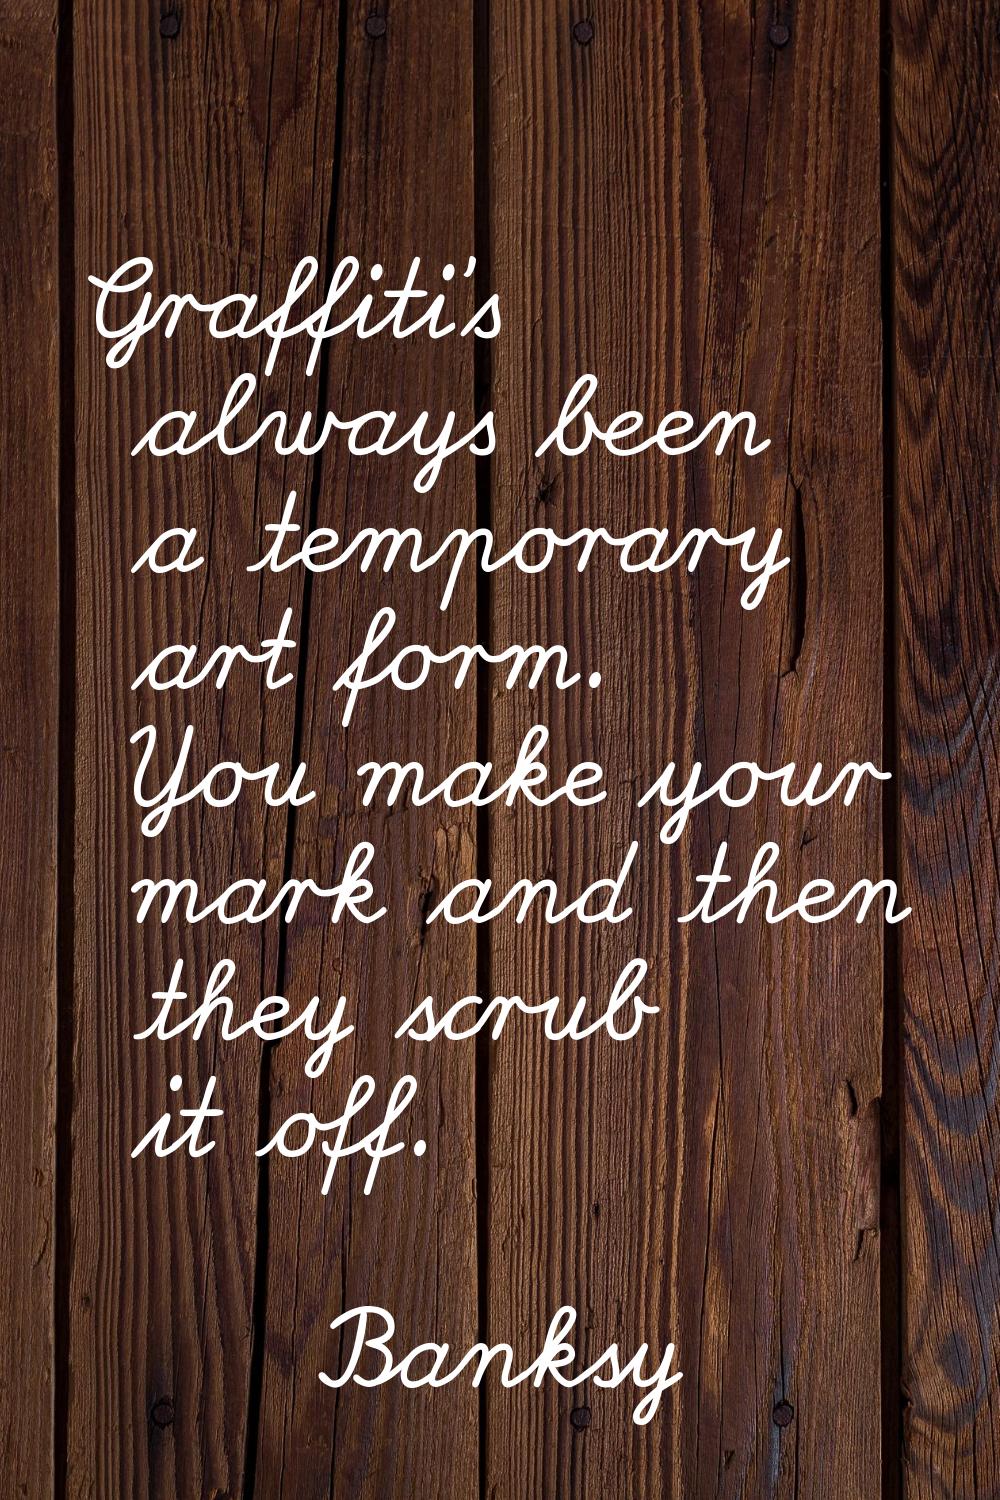 Graffiti's always been a temporary art form. You make your mark and then they scrub it off.